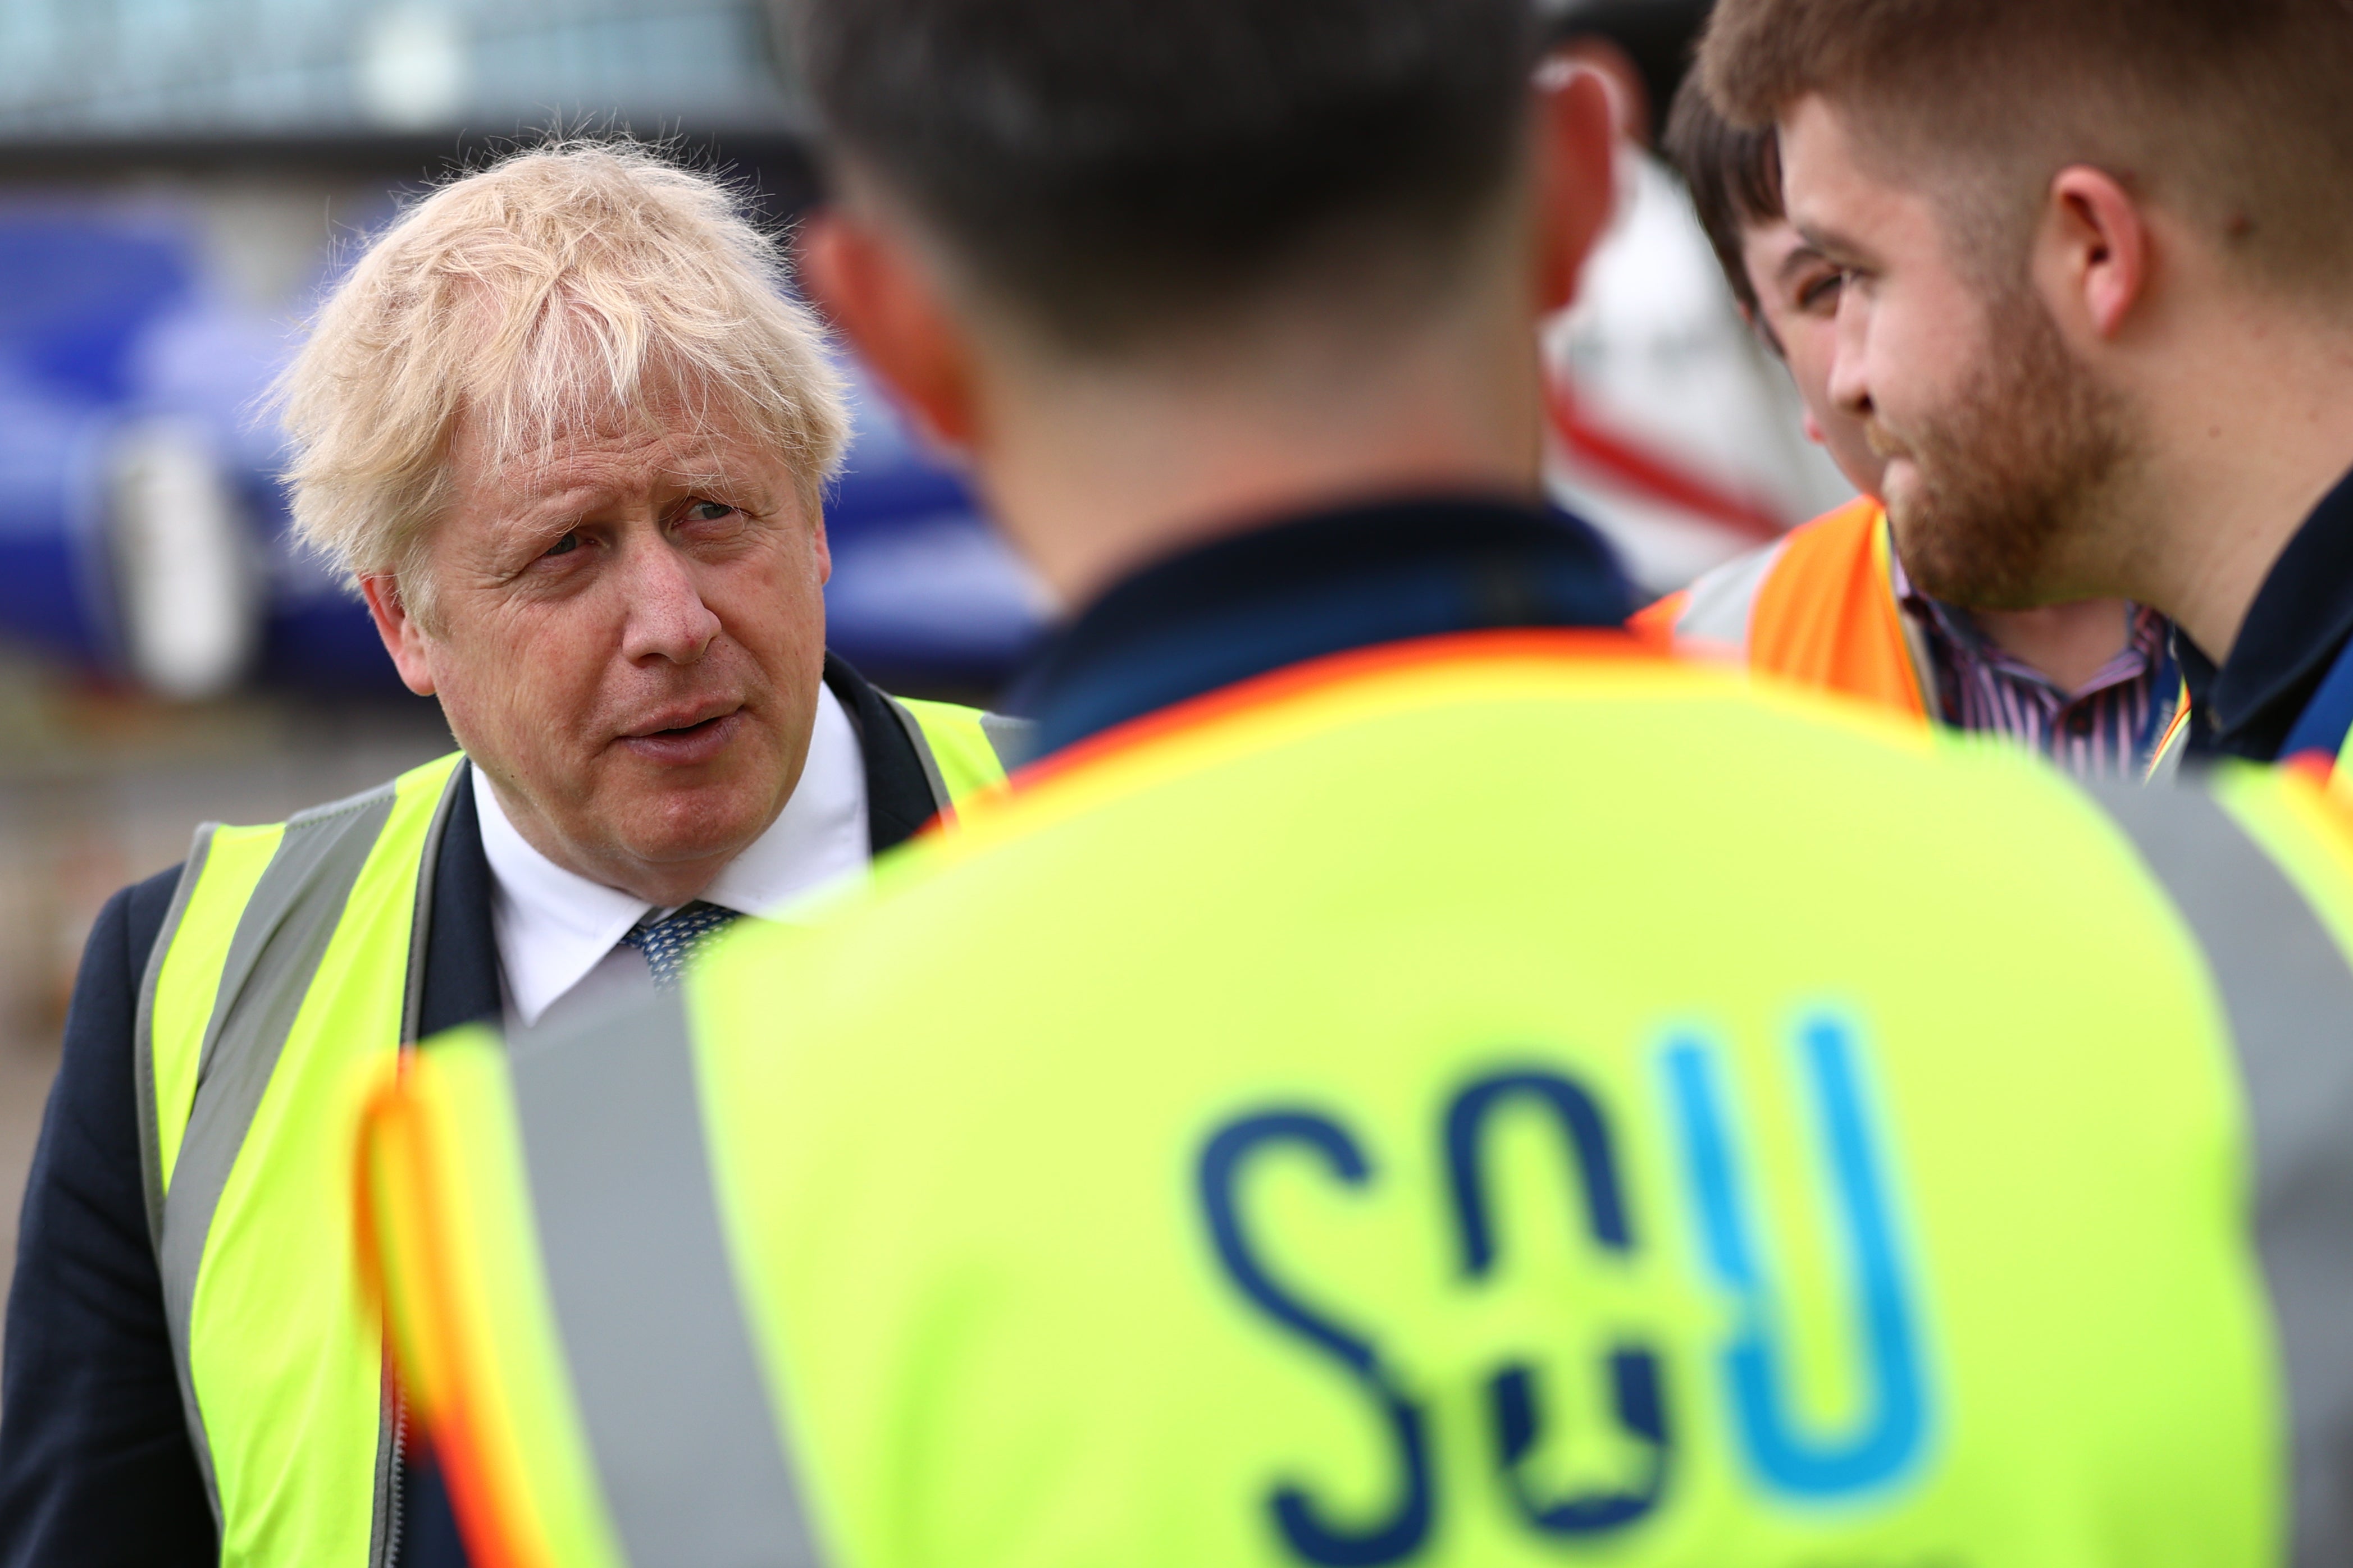 Prime Minister Boris Johnson said there would be a better future once the economy was through the ‘tough patch’ (Adrian Dennis/PA)